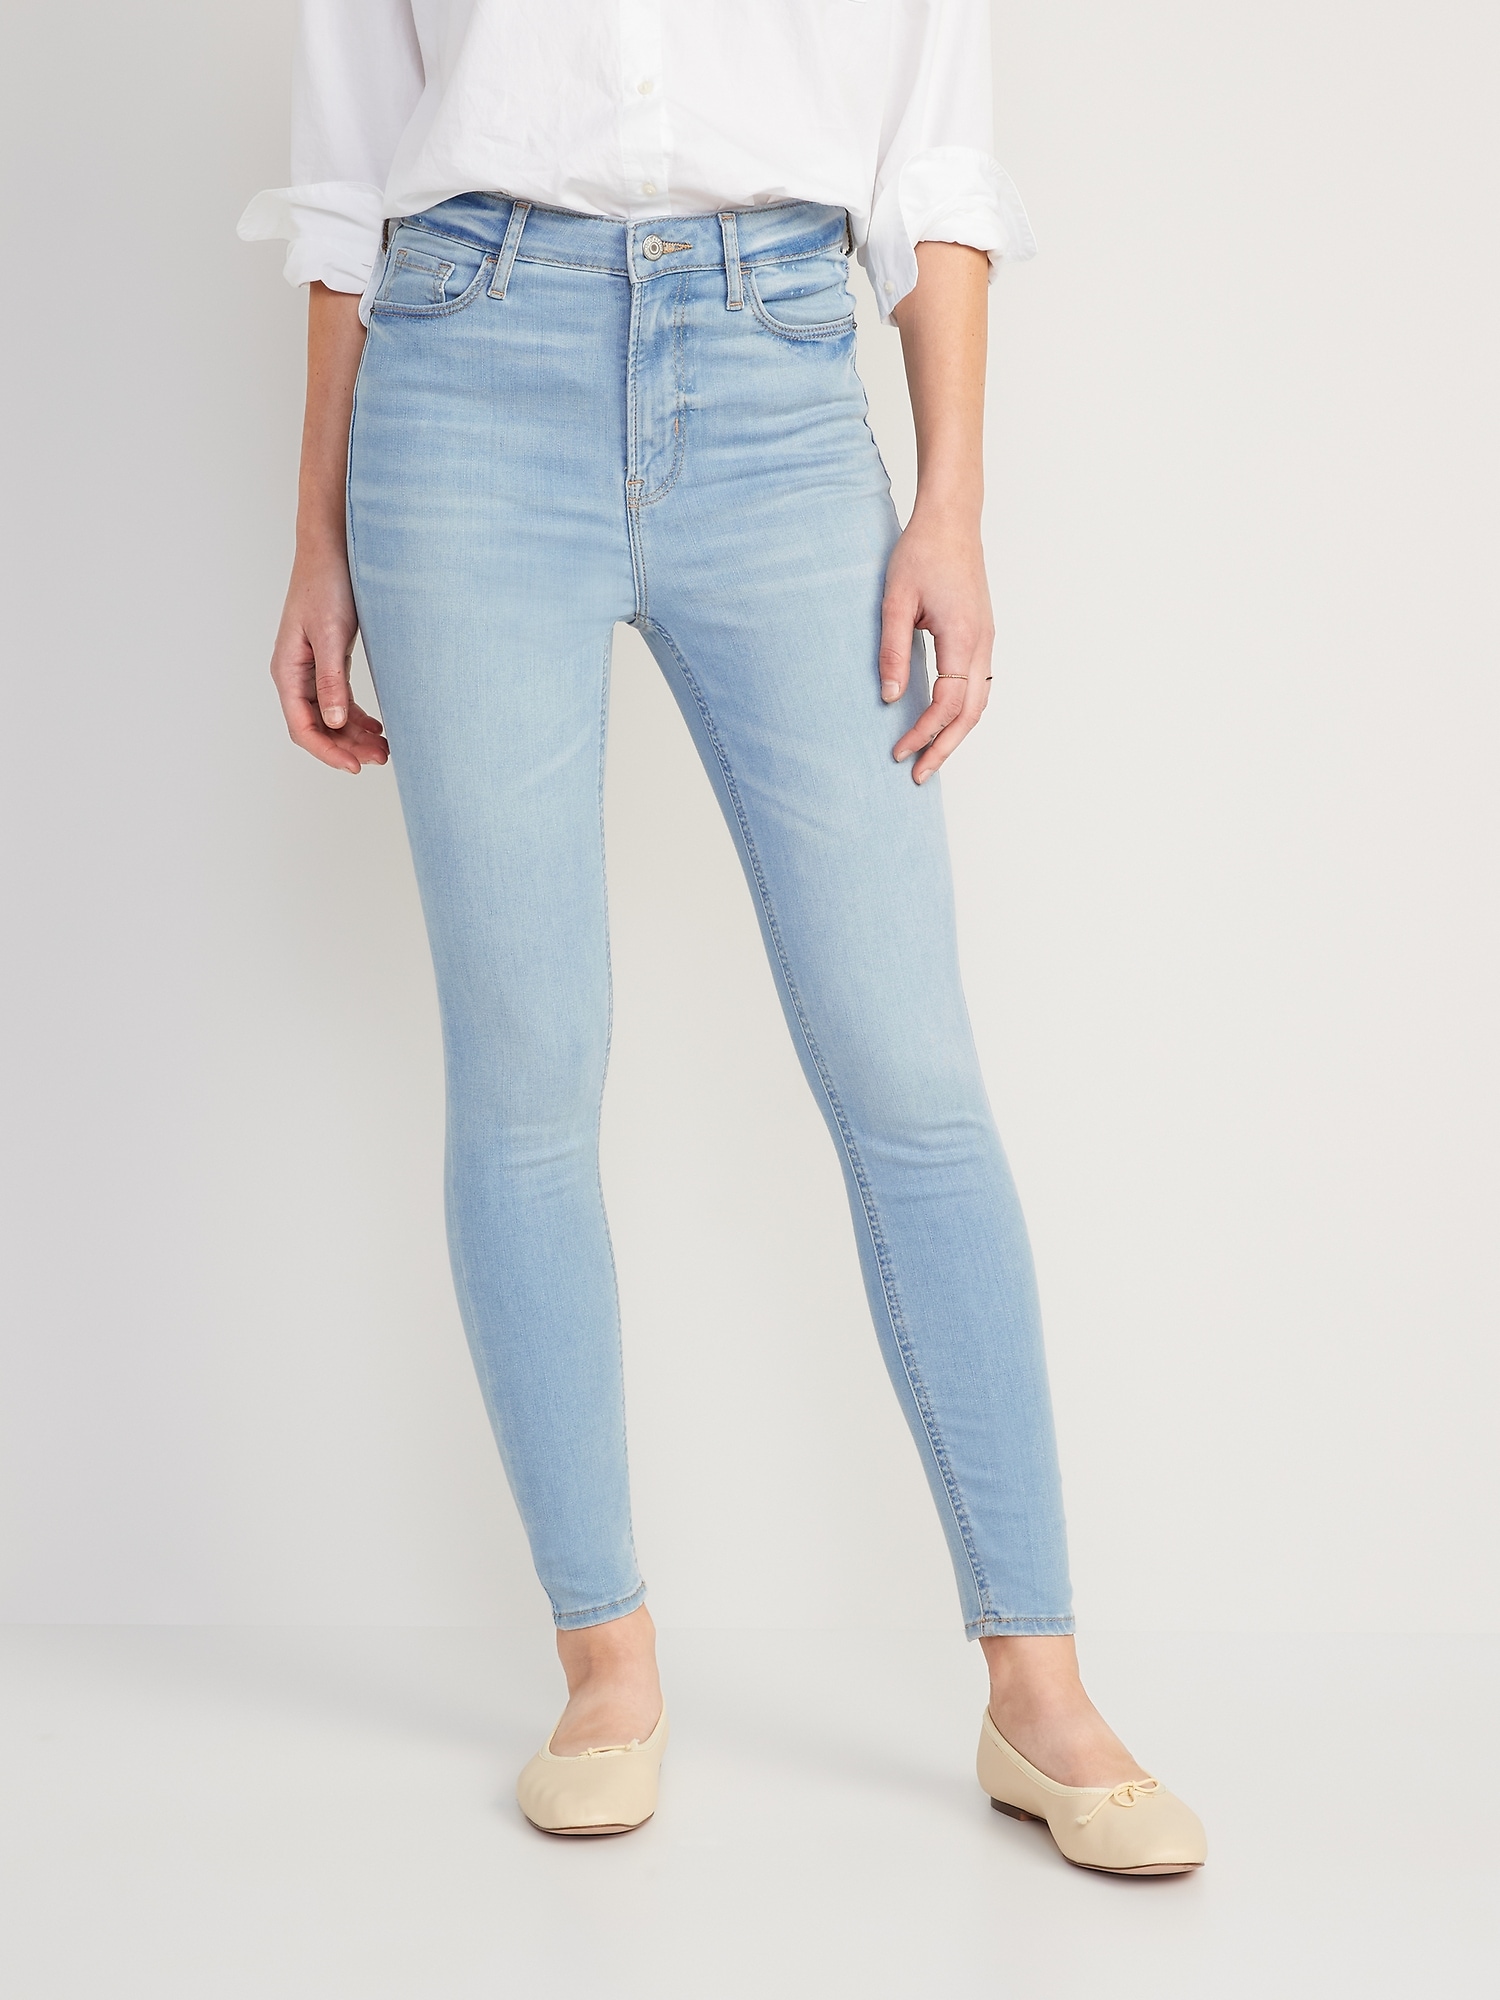 FitsYou 3-Sizes-in-1 Extra High-Waisted Super-Skinny Jeans for Women | Old Navy